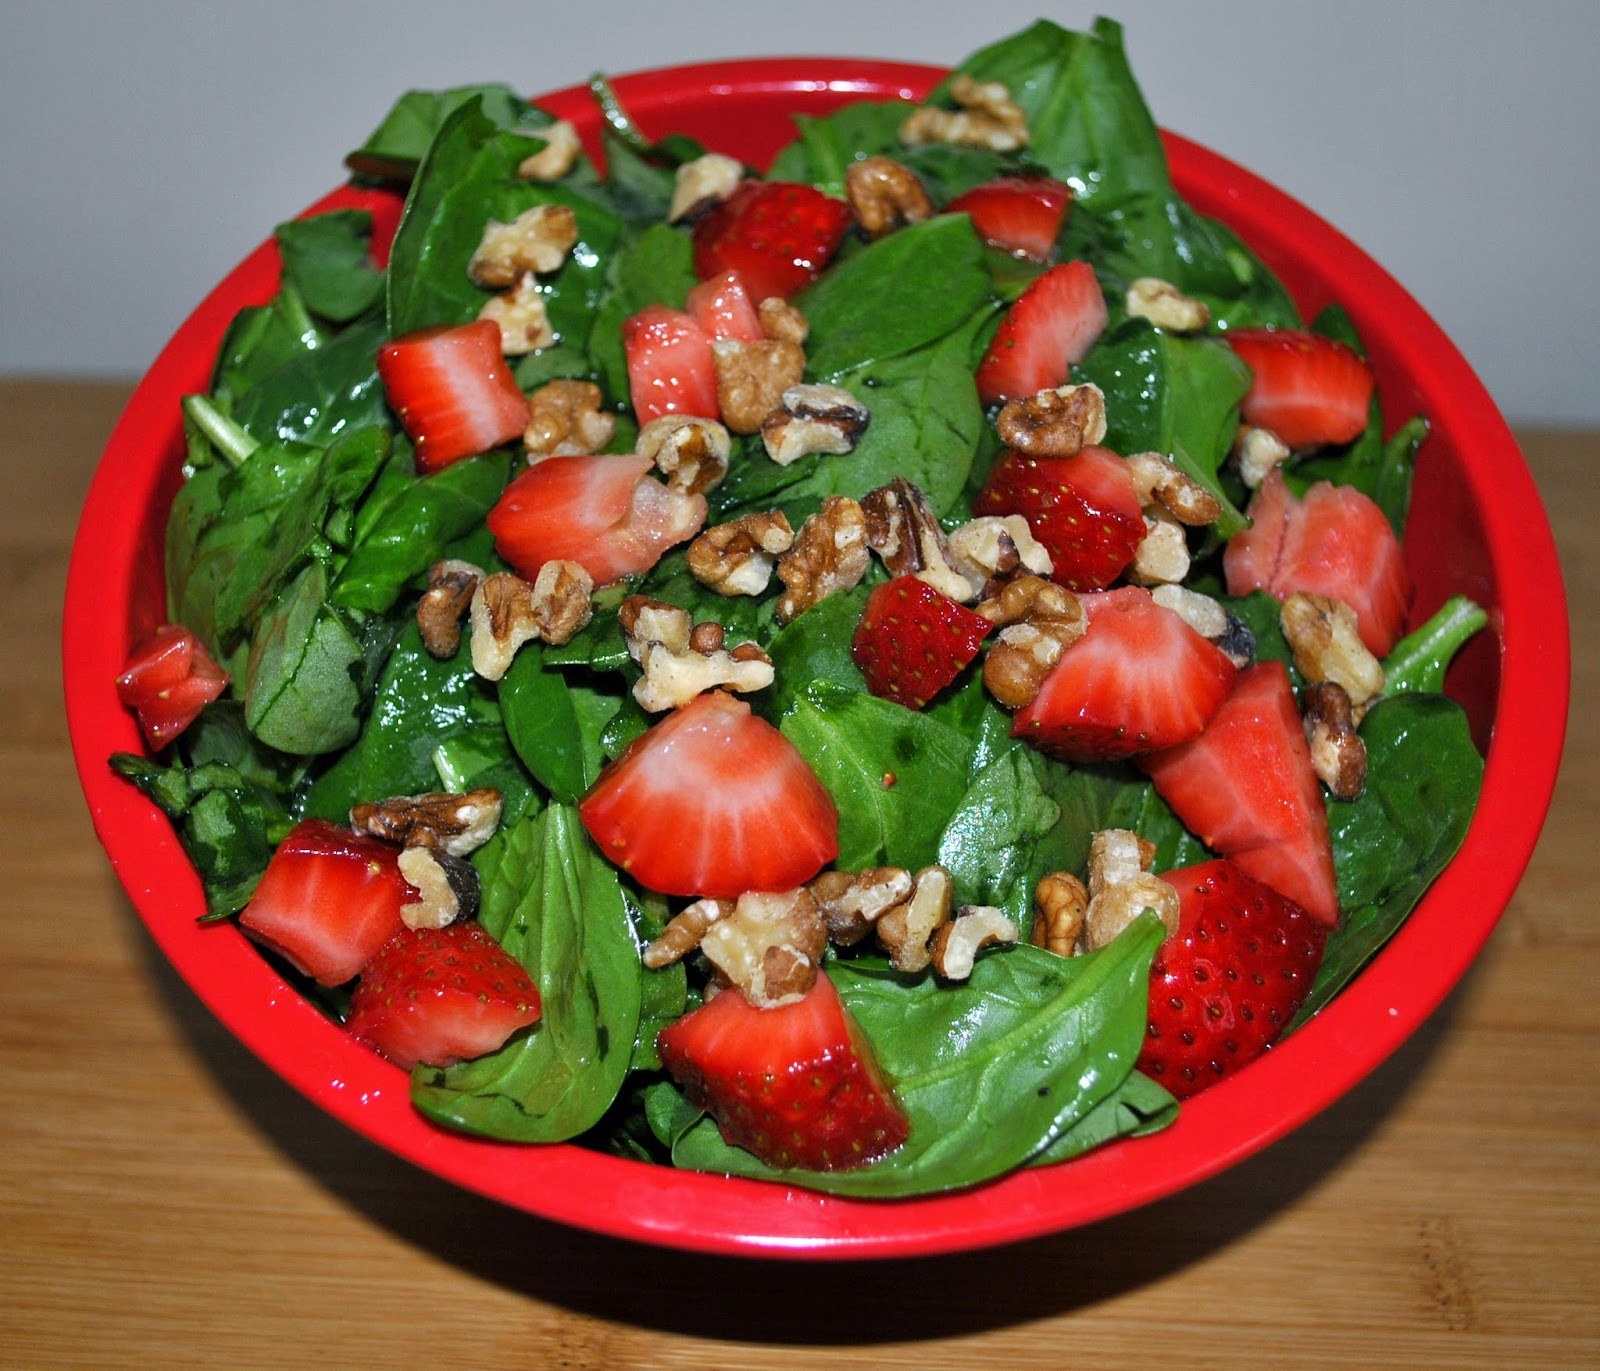 Albums 100+ Pictures Pictures Of Salads Images Completed